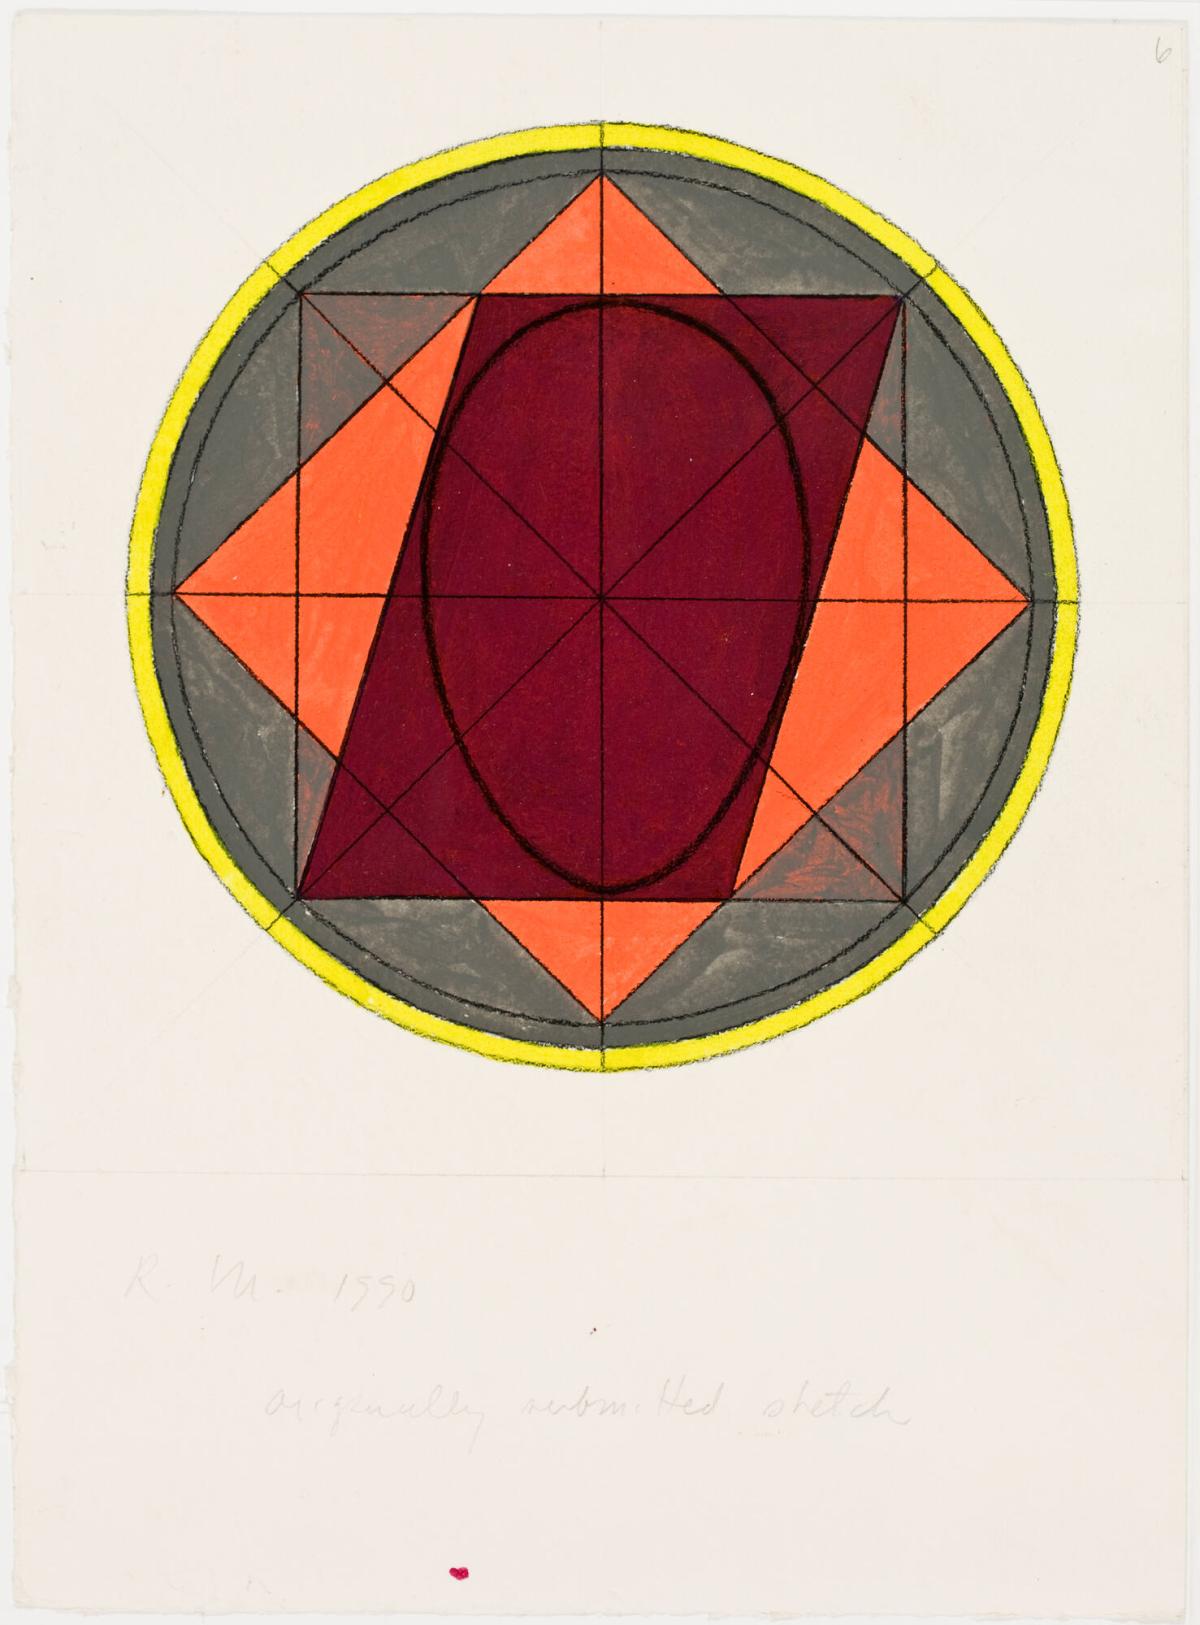 Originally Submitted Sketch No. 6 for the Finney Chapel Rose Window, Oberlin College